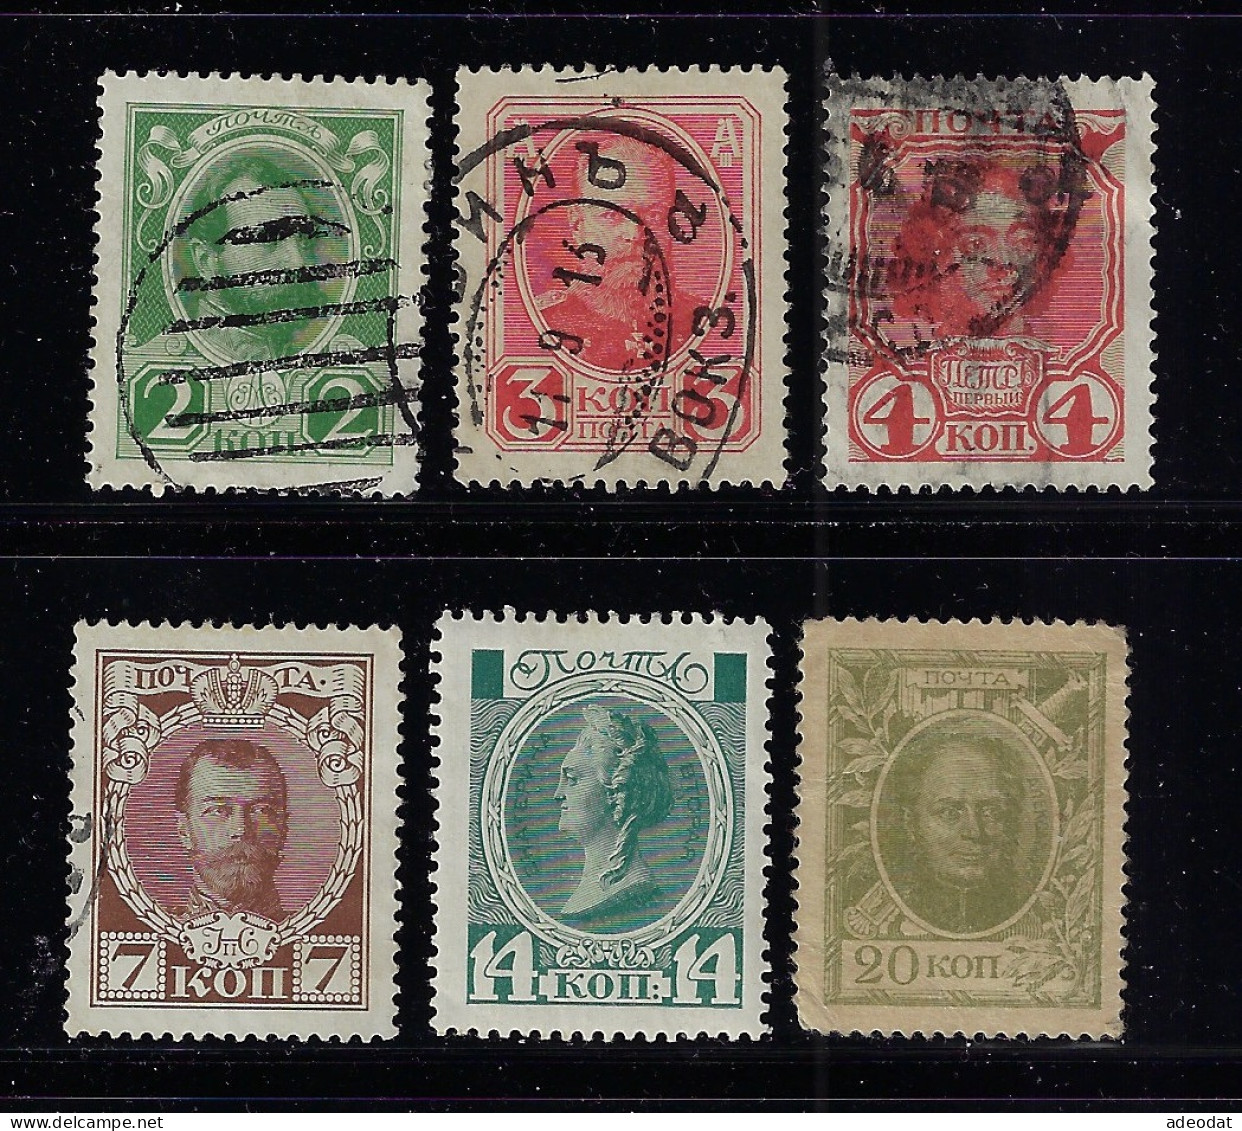 RUSSIA  1913-15 SCOTT #89-92,94,107  Used - Used Stamps